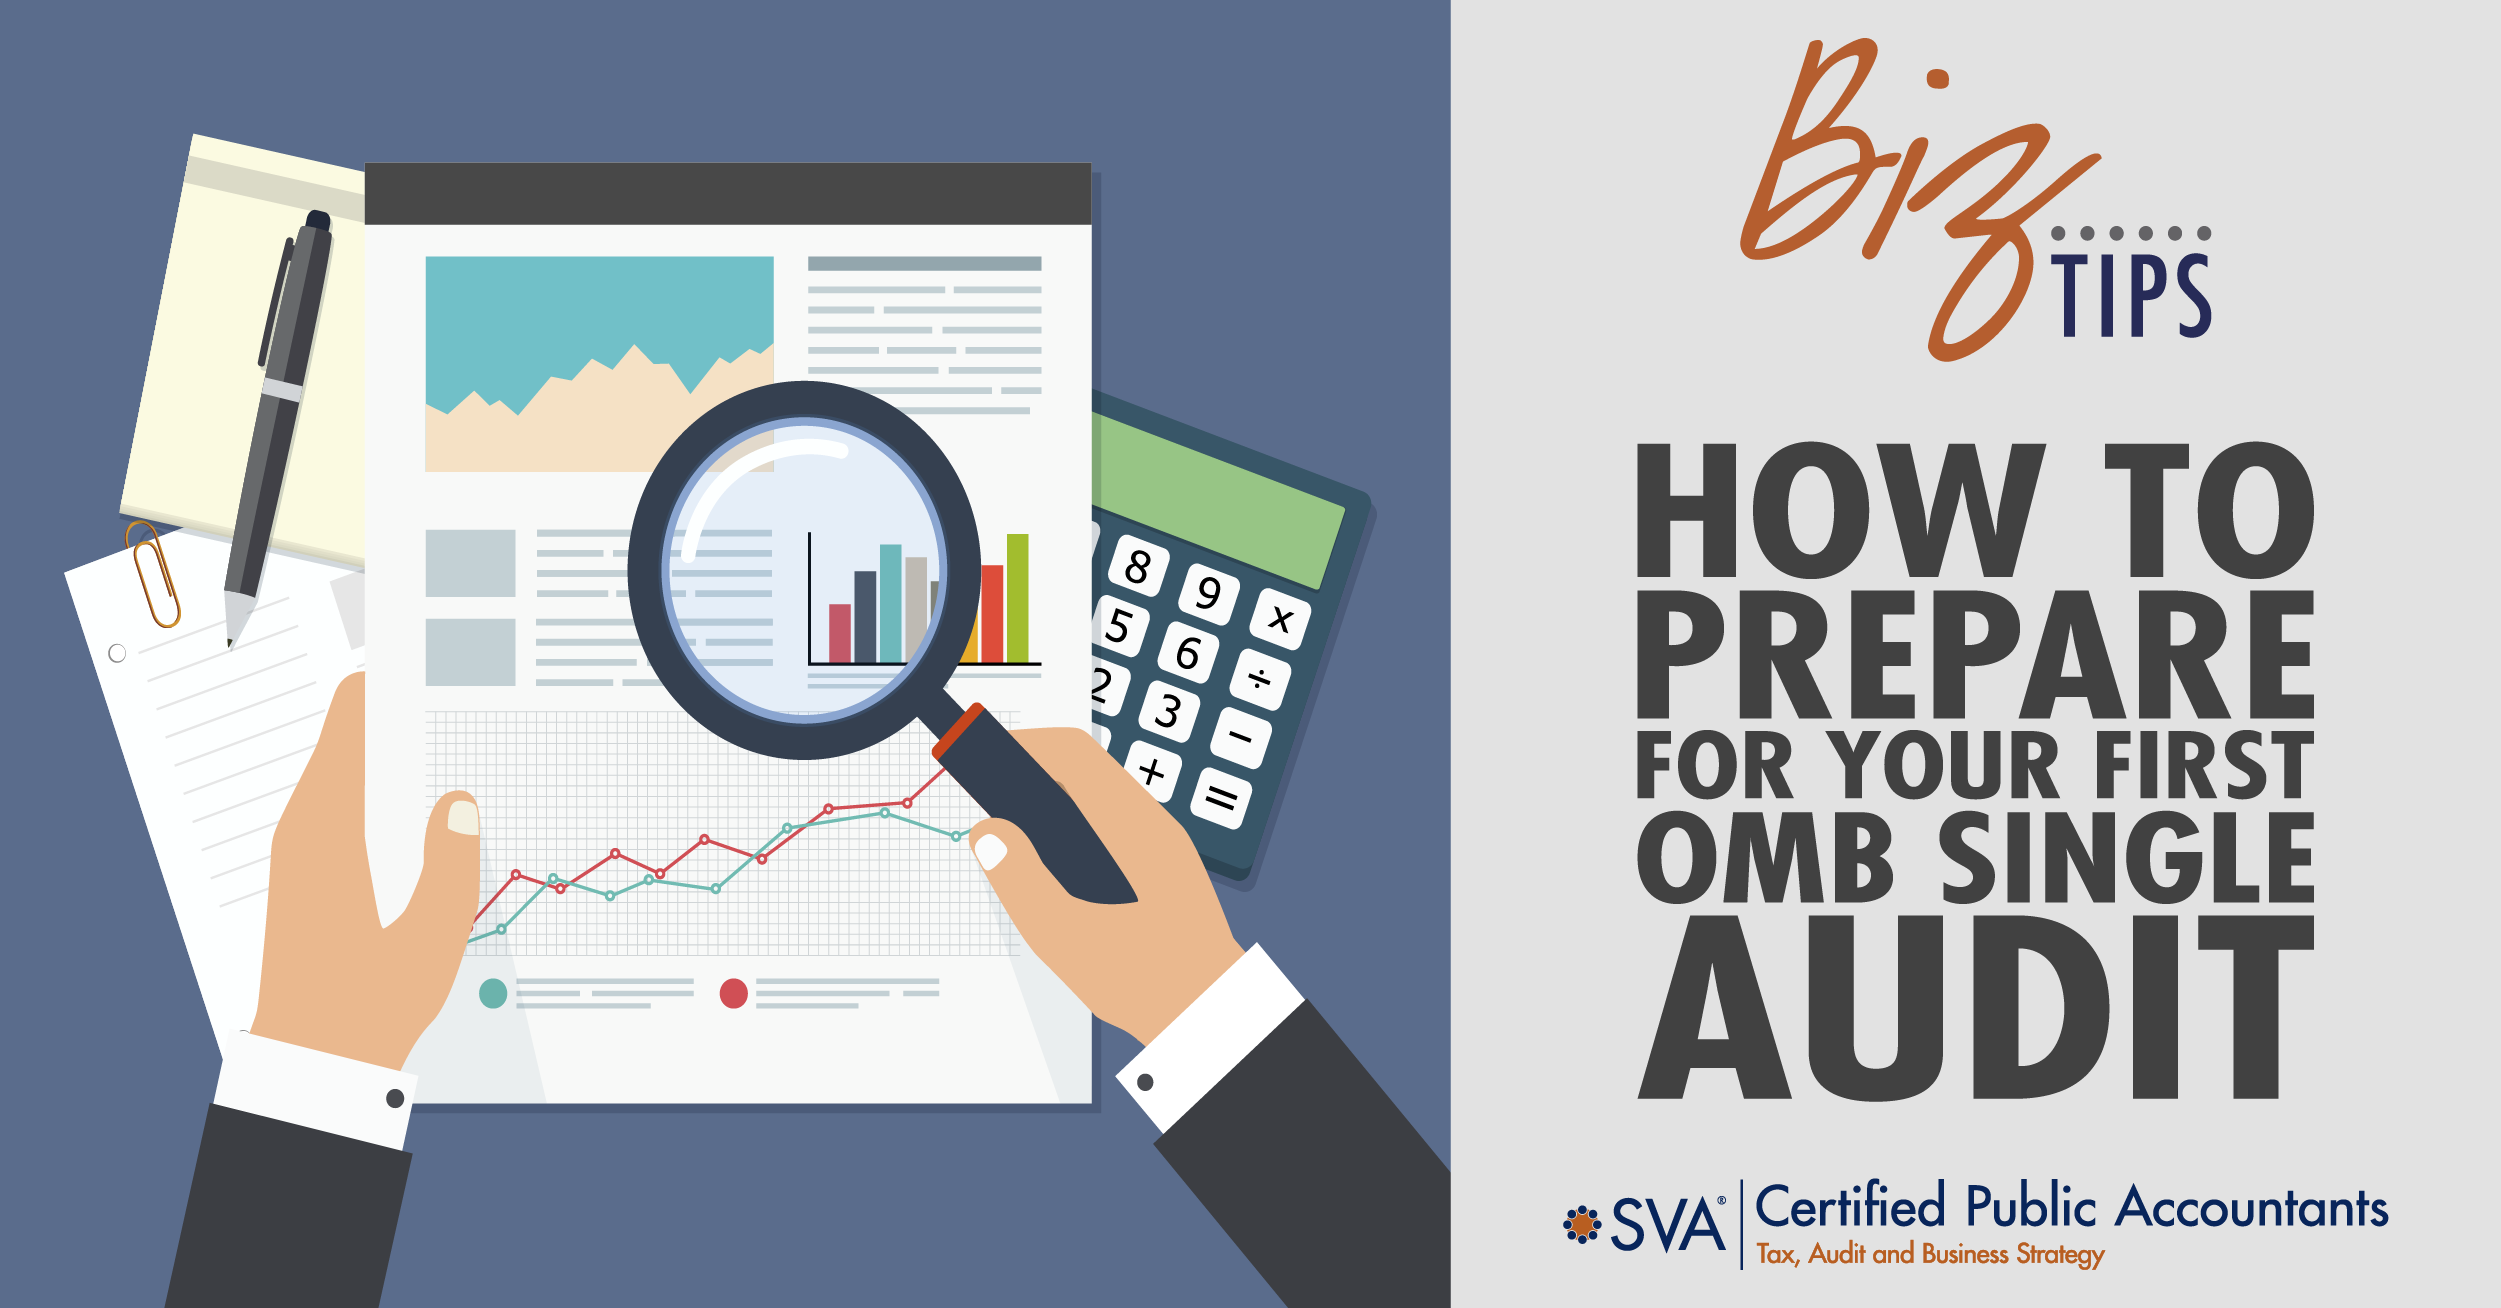 sva-certified-public-accountants-biz-tips-how-to-prepare-for-your-first-omb-single-audit